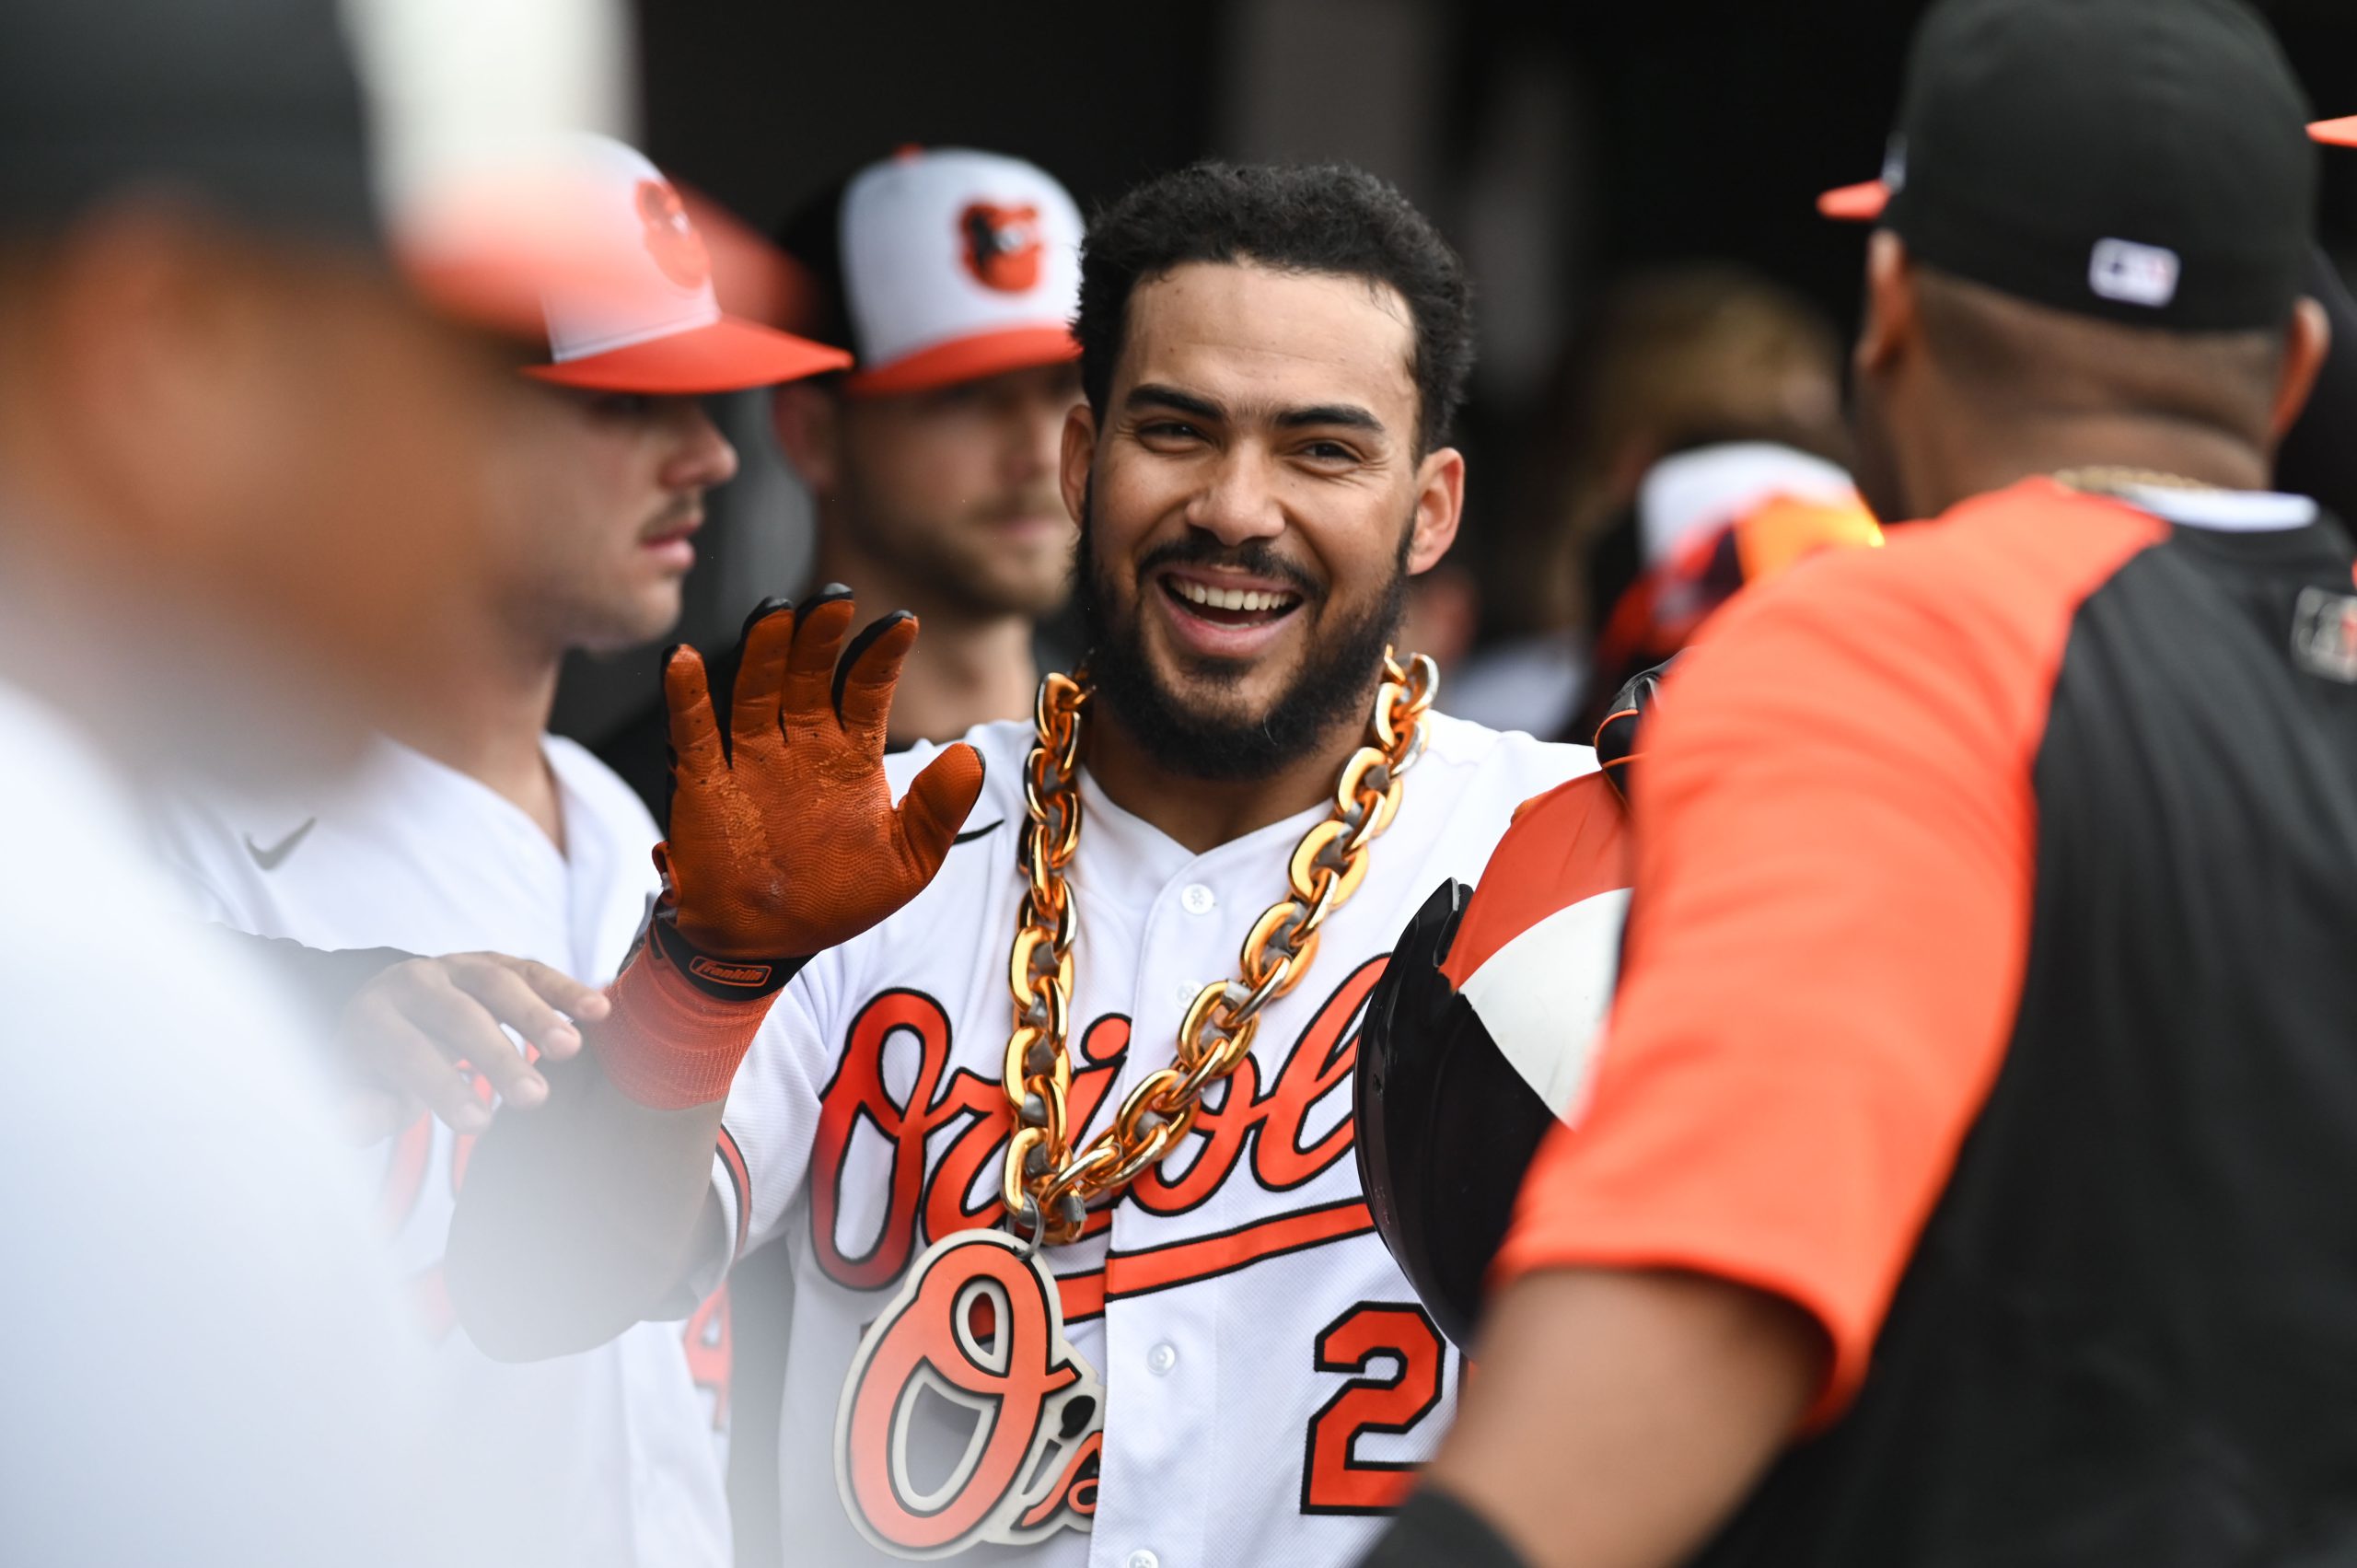 Has Anthony Santander earned a larger role in the long-term fu mlb new york  yankees official replica home jersey ture of the Orioles?